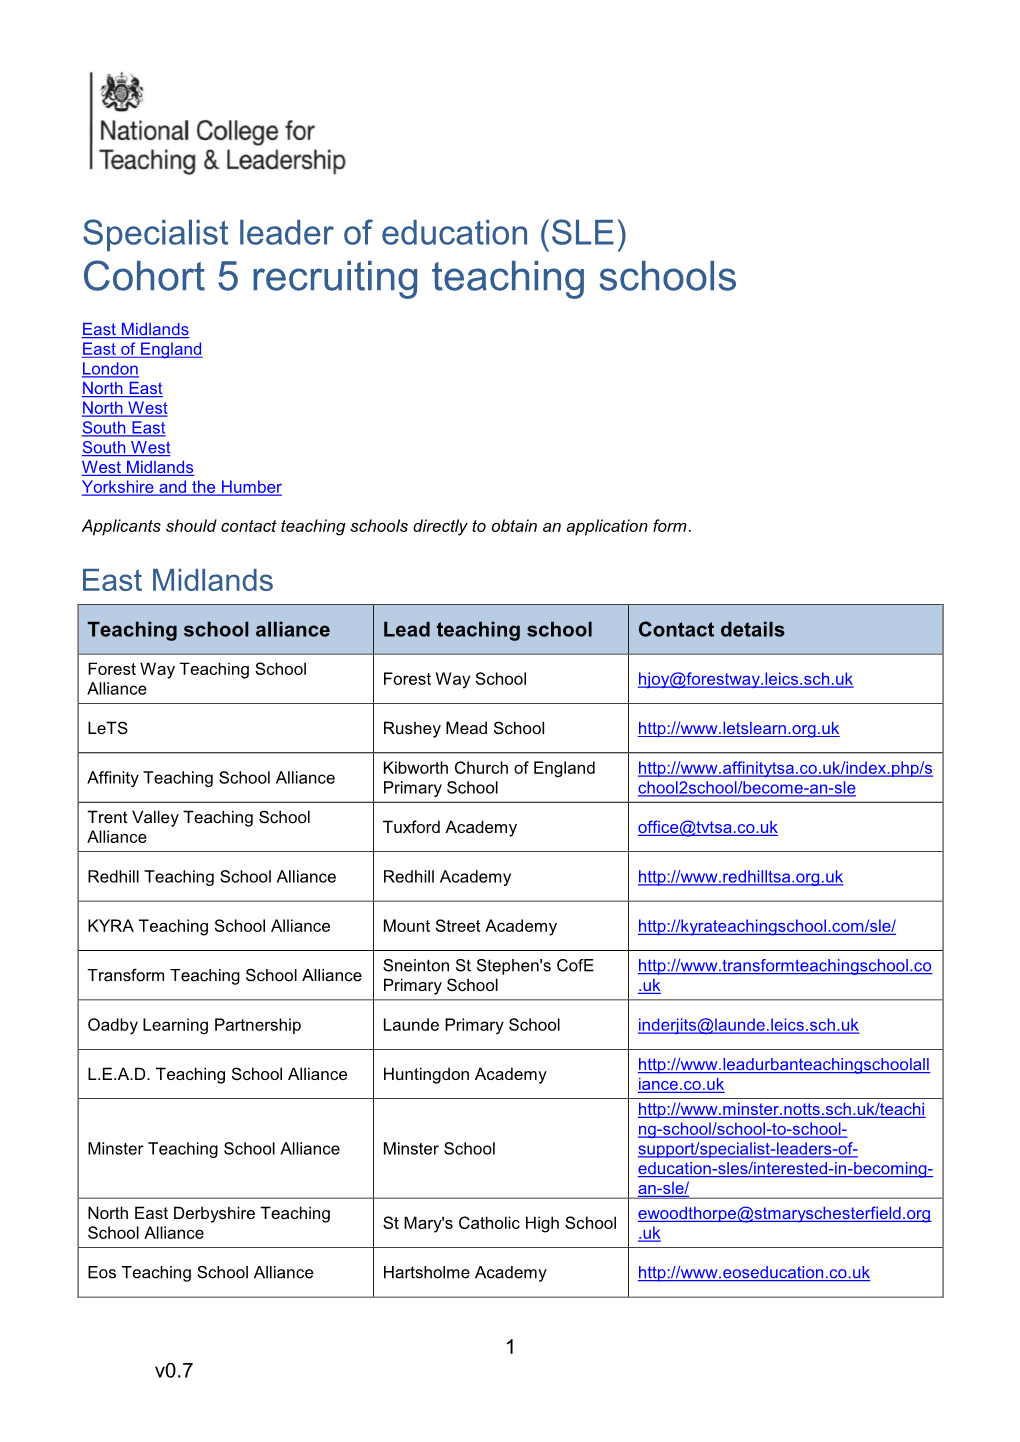 Specialist Leader of Education (SLE) Cohort 5 Recruiting Teaching Schools